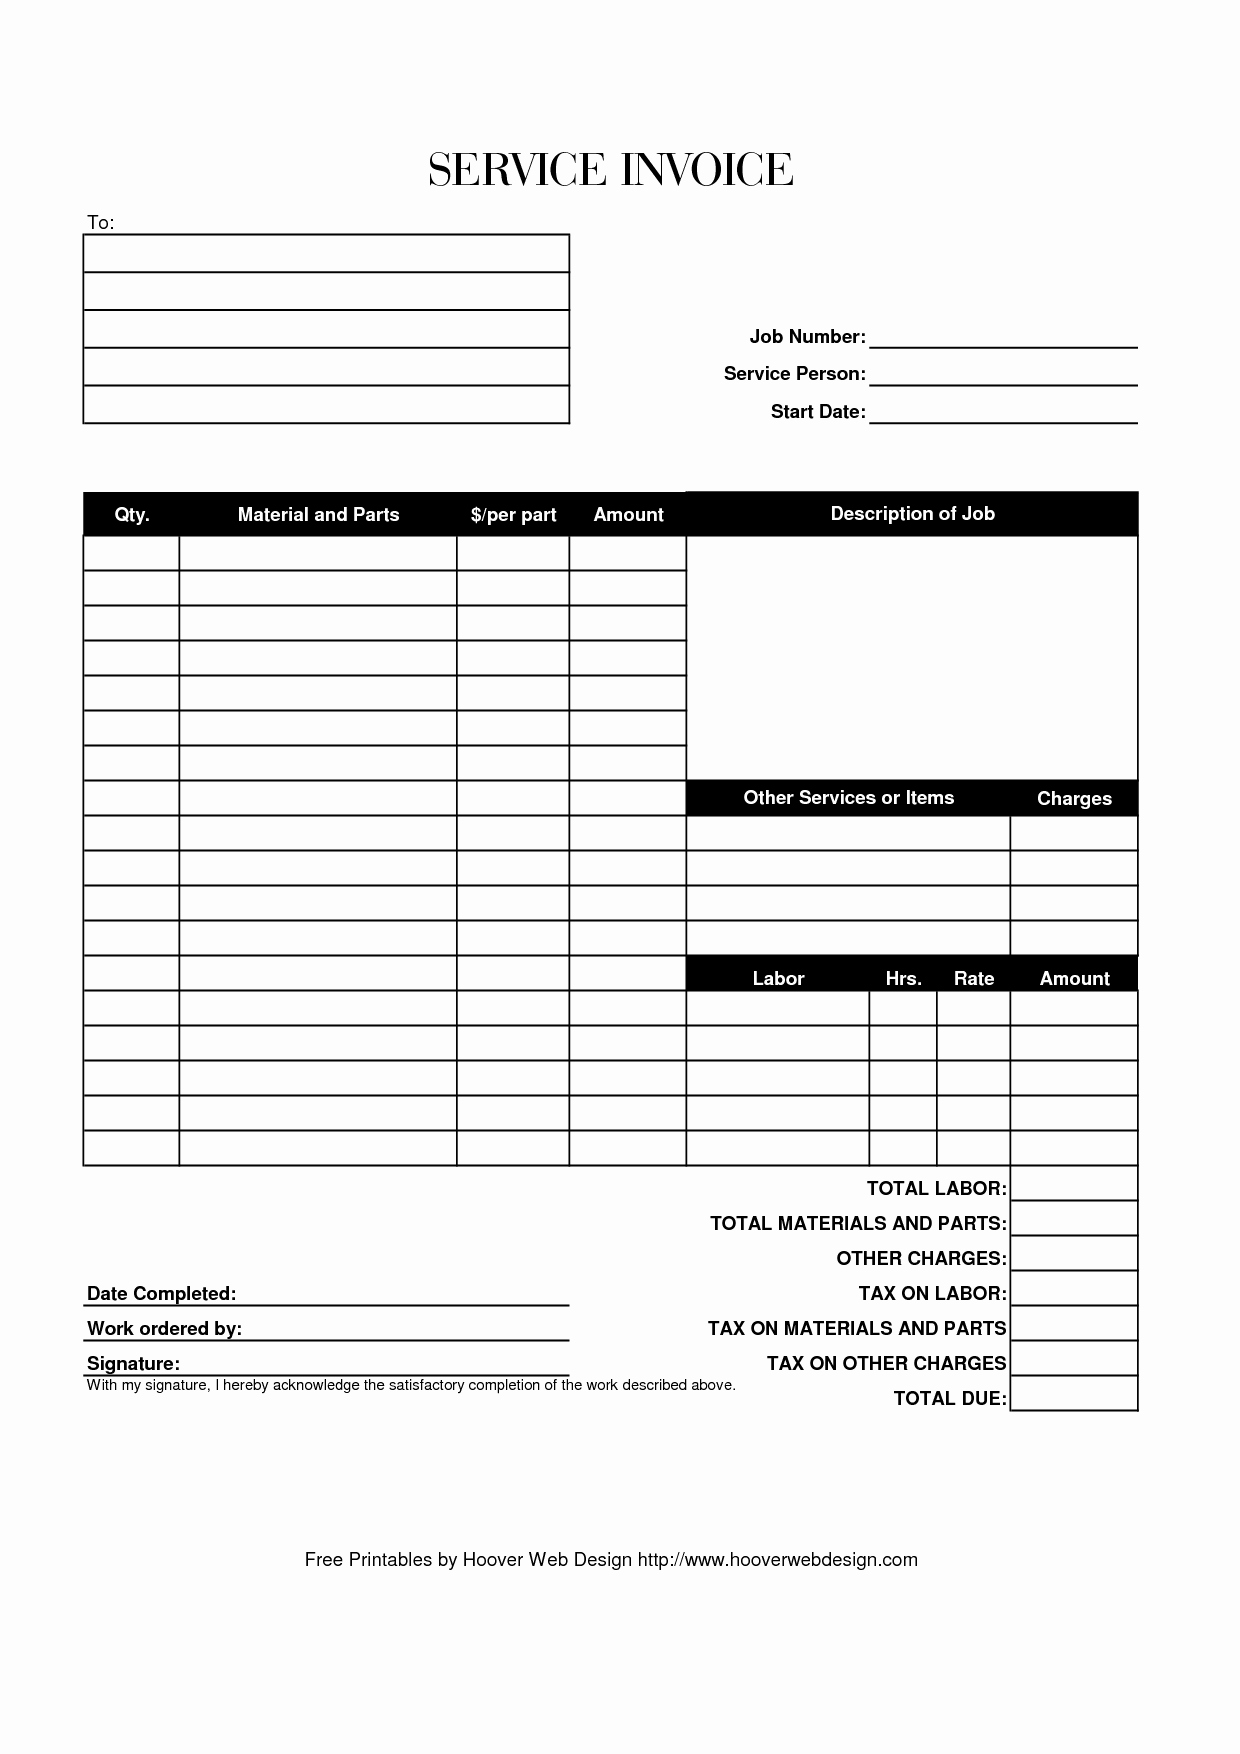 Receipt Template Free Printable Best Of Hoover Receipts